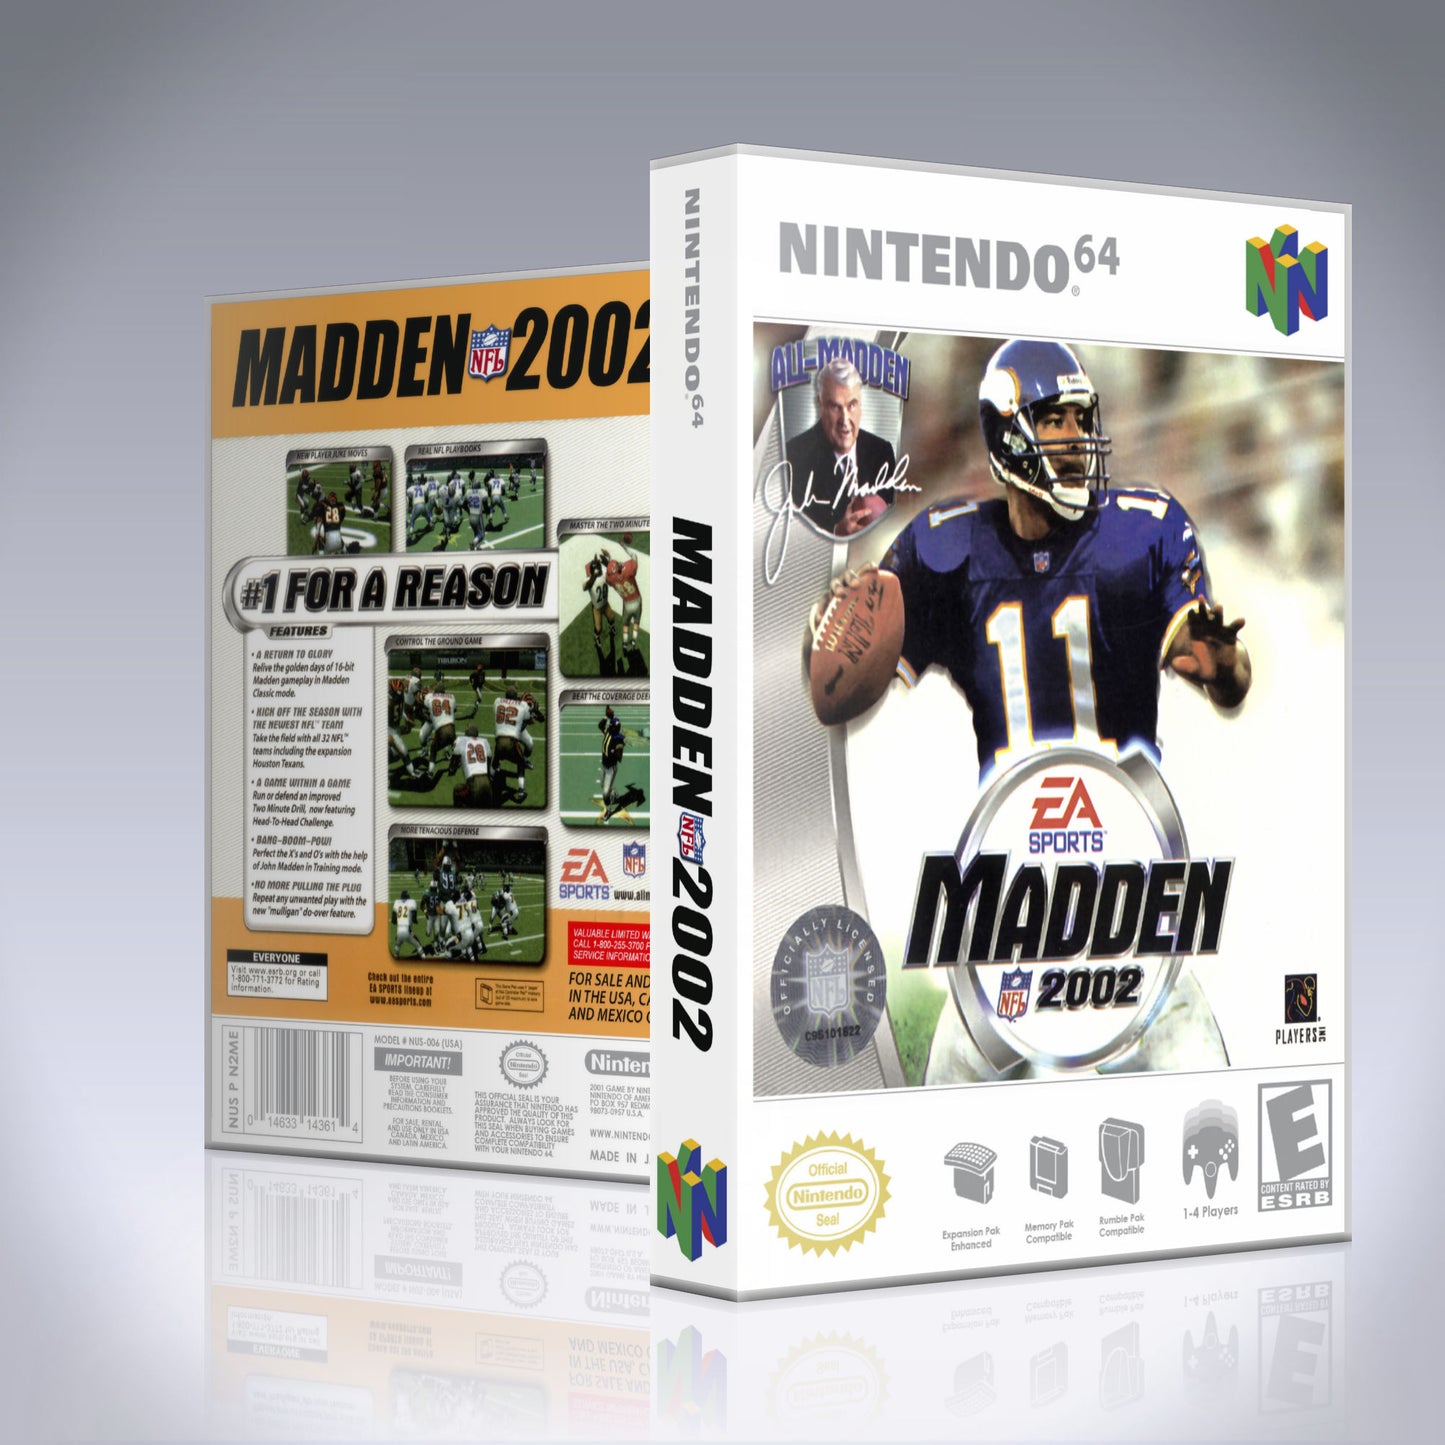 N64 Universal Game Case - NO GAME - Madden NFL 2002